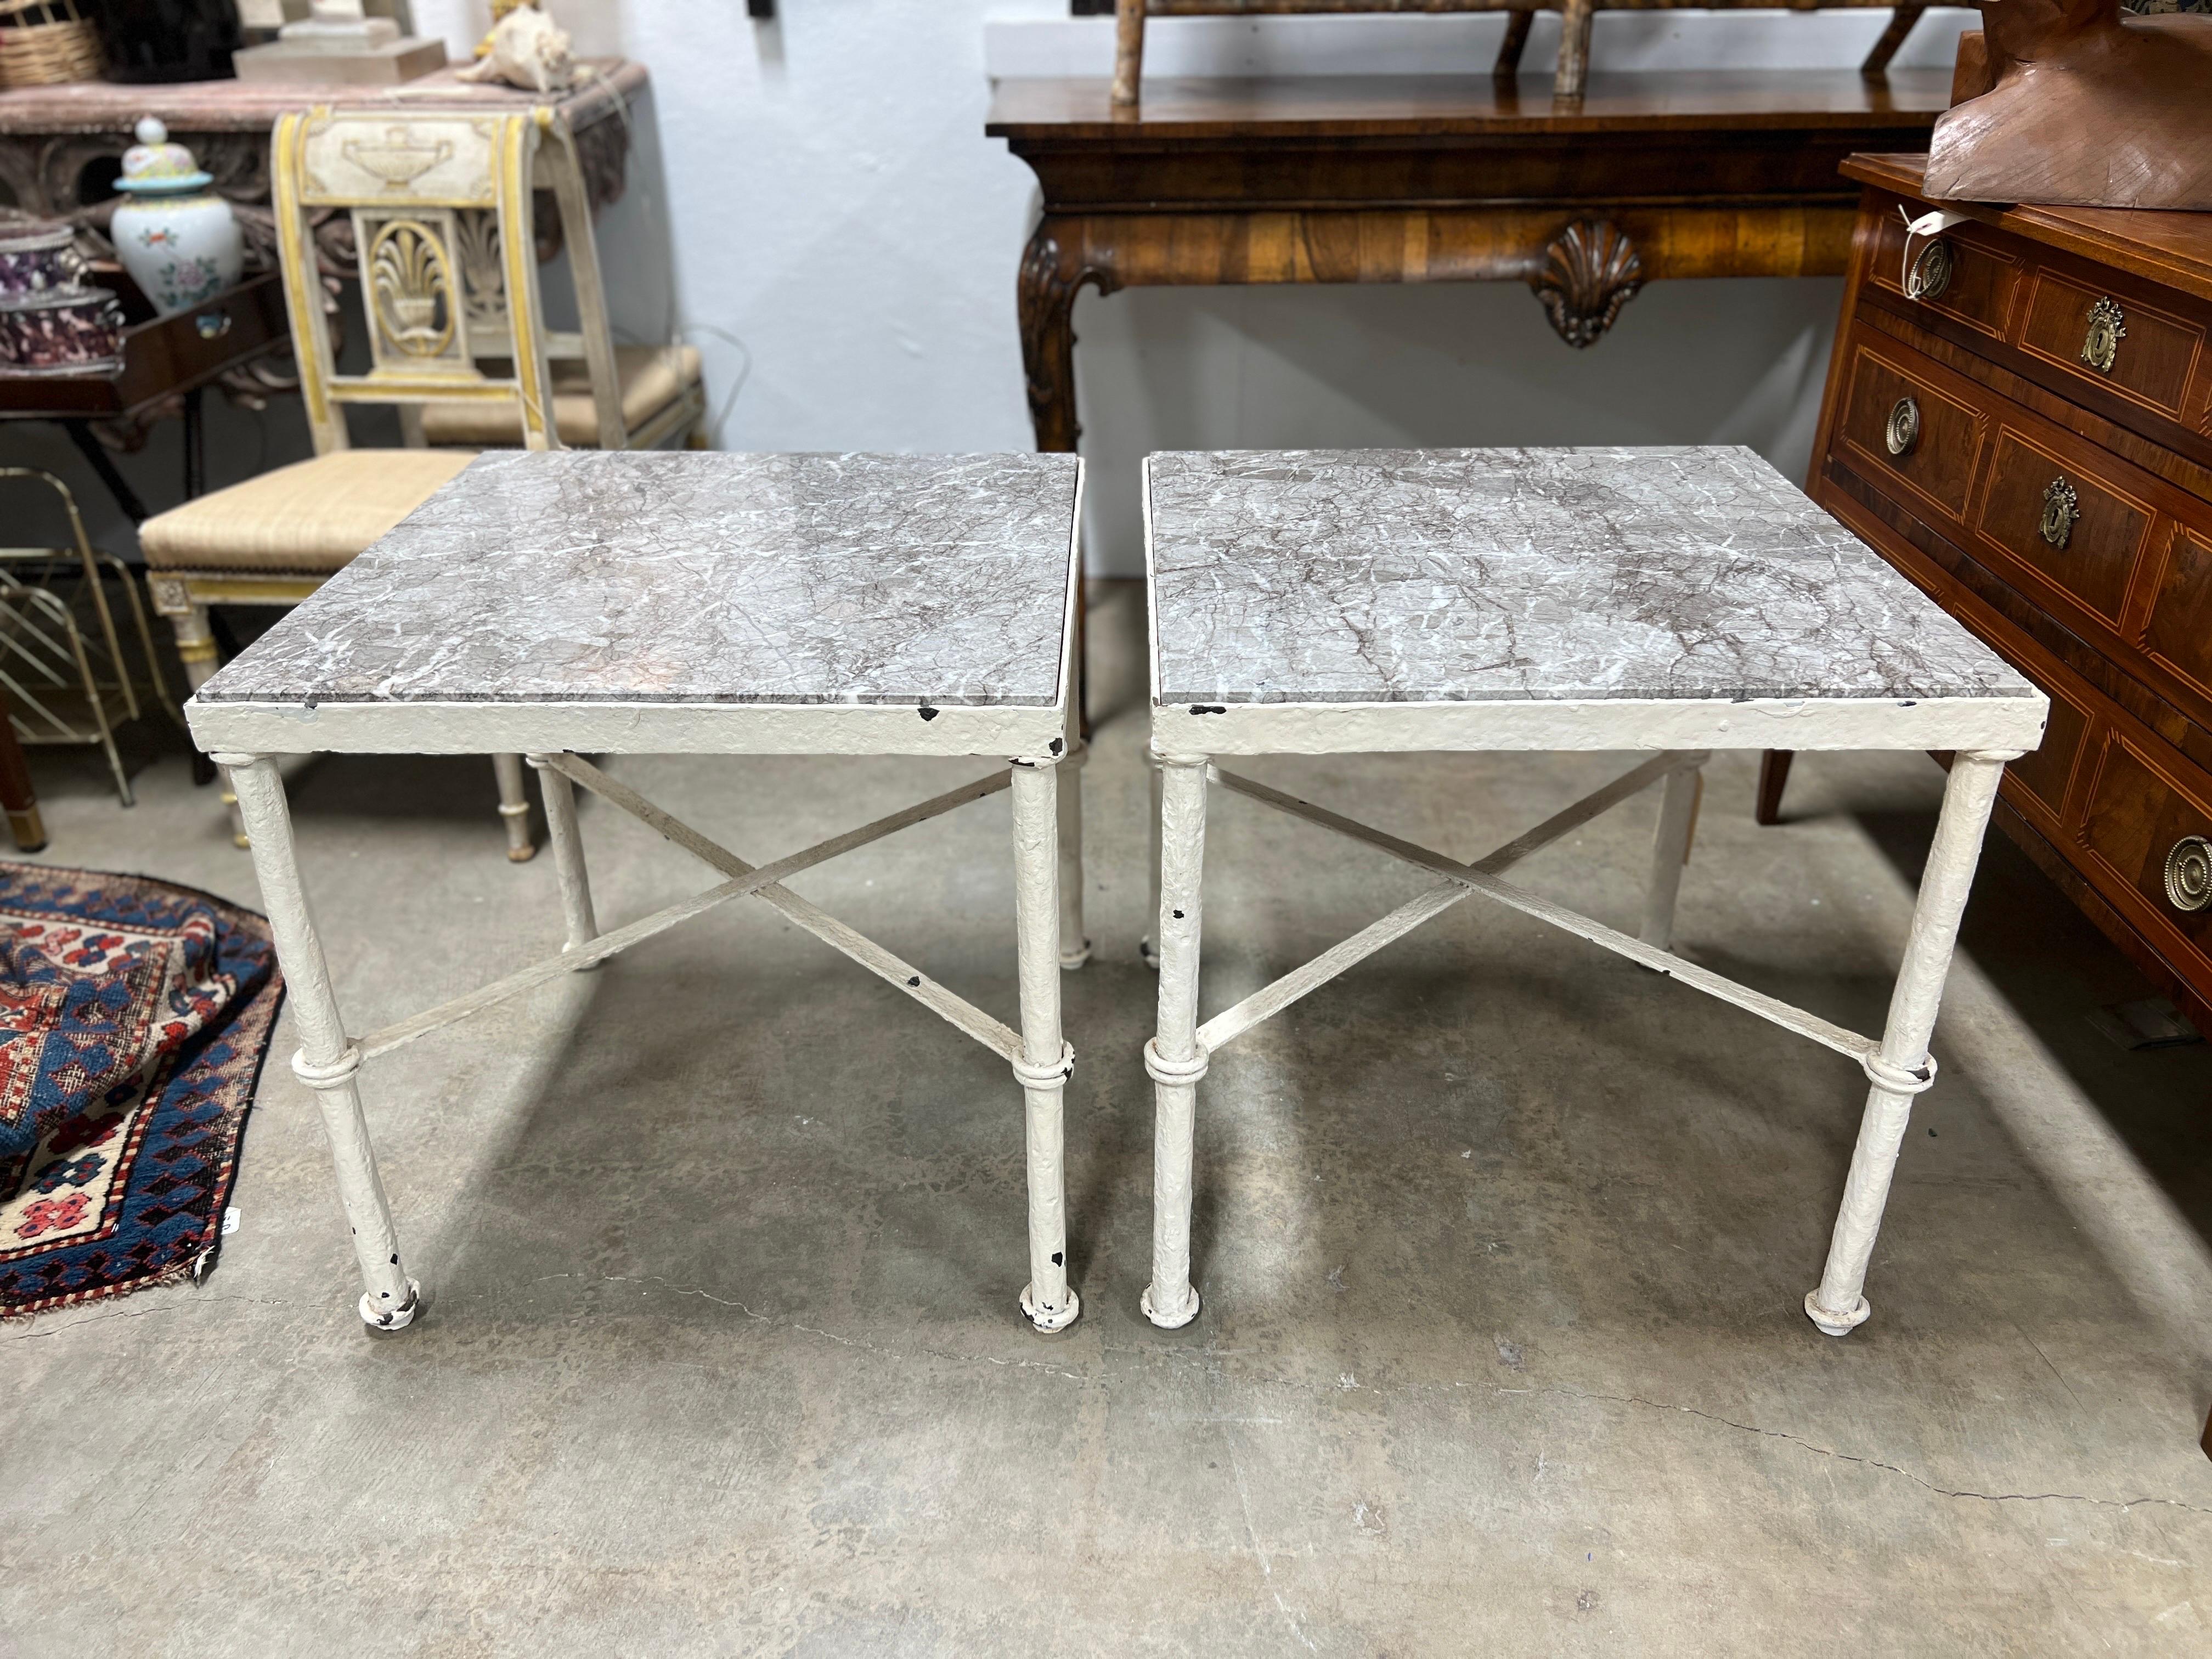 Style of Diego Giacometti (Swiss, 1902-1985). 

This very fine quality side tables are constructed with a solid HEAVY iron frame which is accented by faux rope straps to the legs and a x-form cross bar. The tables which are of square form also have